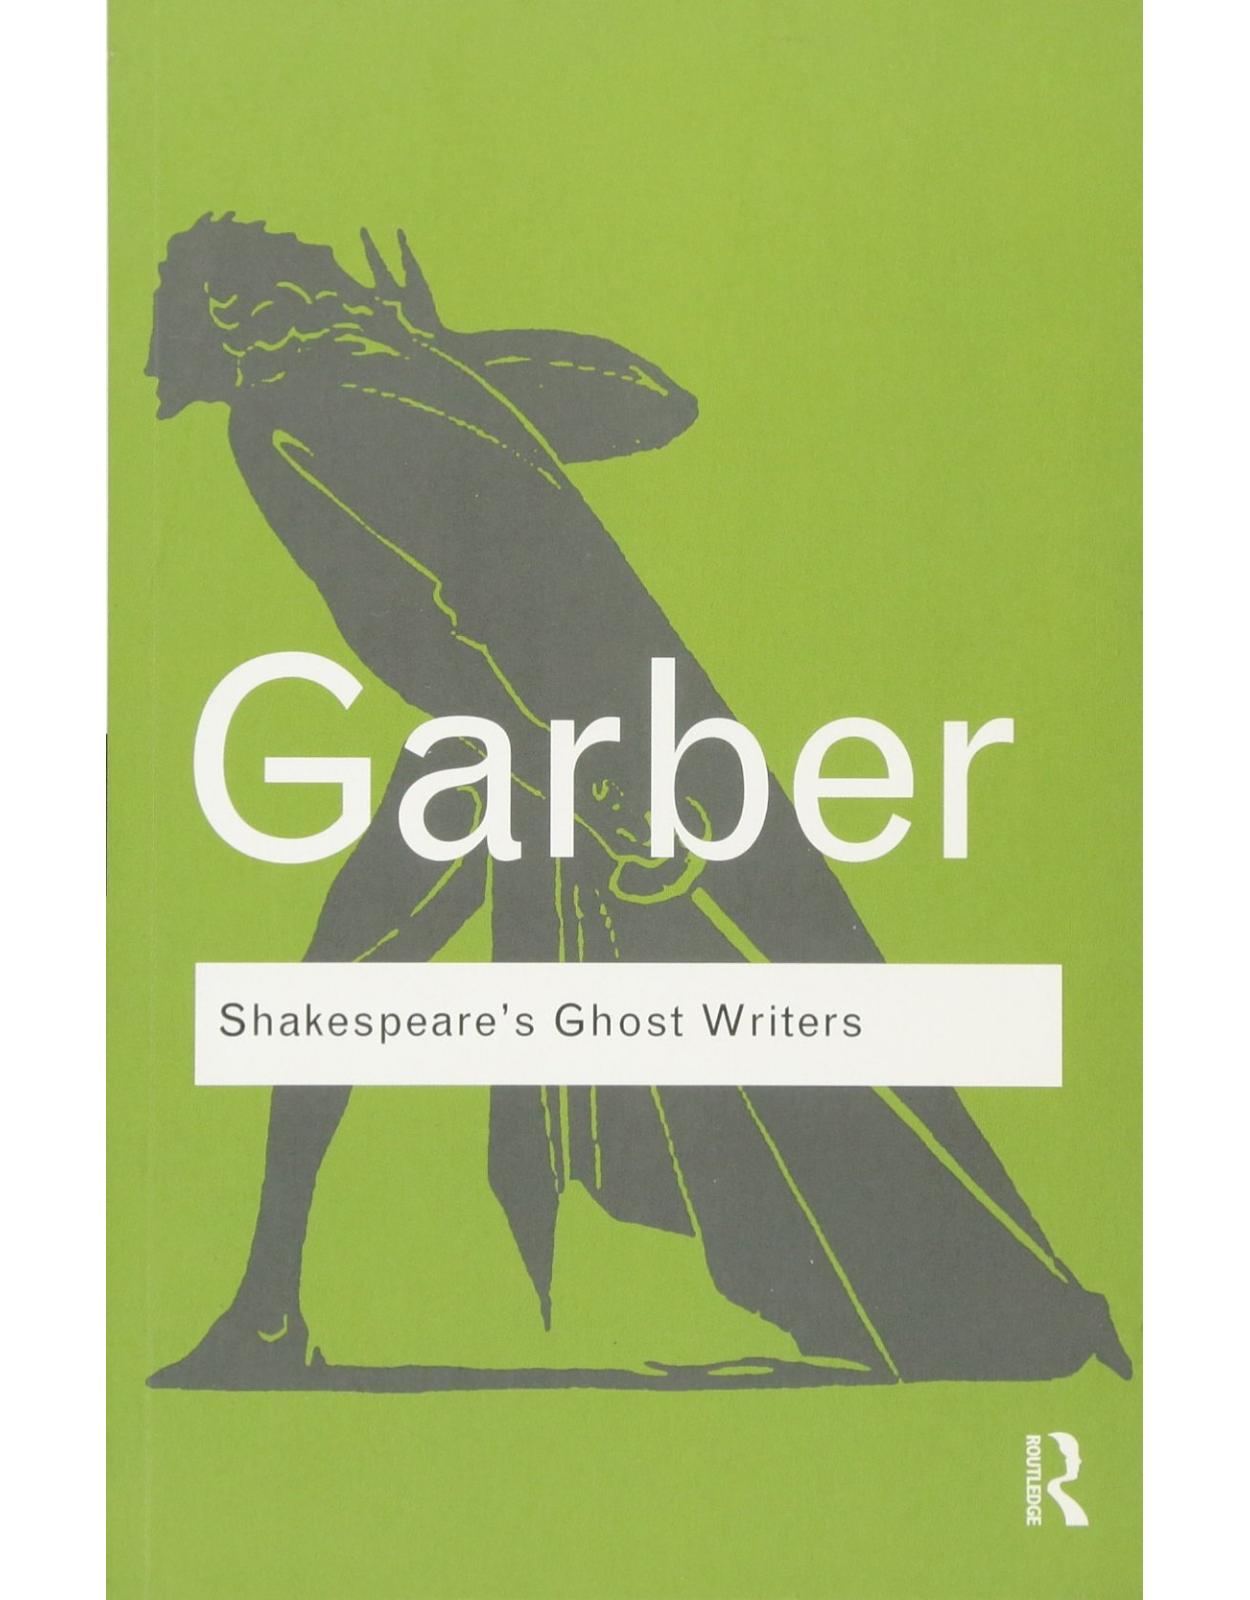 Shakespeare's Ghost Writers: Literature as Uncanny Causality